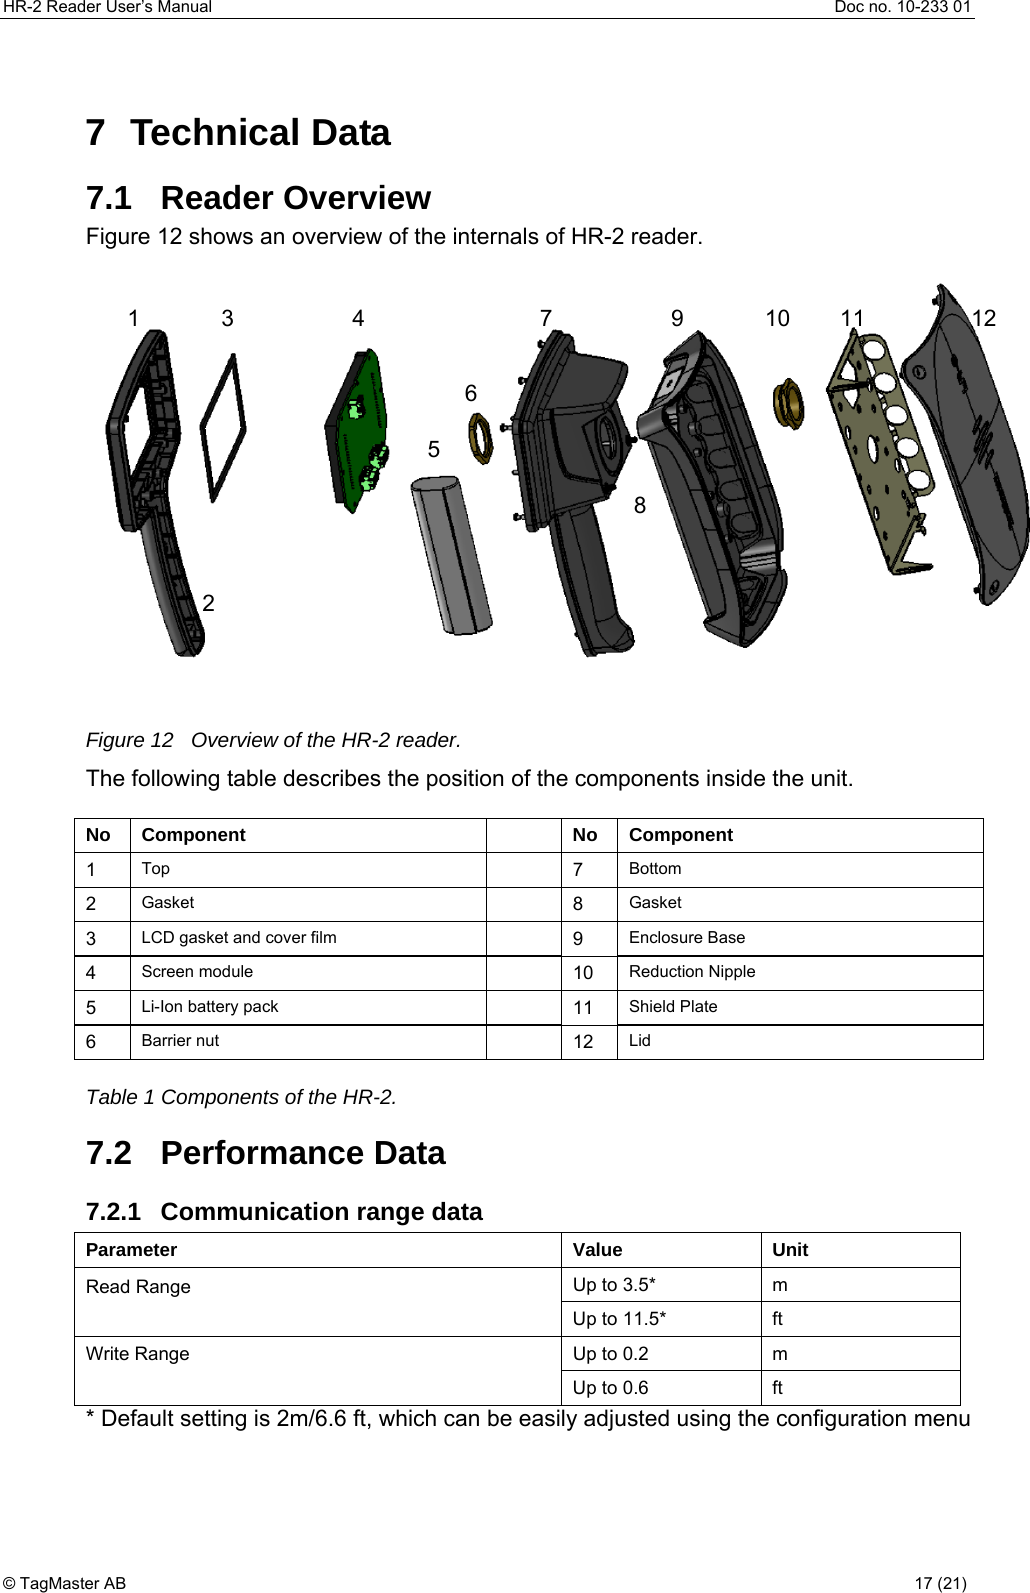 HR-2 Reader User’s Manual  Doc no. 10-233 01 © TagMaster AB  17 (21)   7 Technical Data 7.1 Reader Overview Figure 12 shows an overview of the internals of HR-2 reader.     Figure 12   Overview of the HR-2 reader. The following table describes the position of the components inside the unit.  No Component   No Component 1  Top   7 Bottom 2  Gasket   8 Gasket 3  LCD gasket and cover film   9 Enclosure Base 4  Screen module   10 Reduction Nipple 5  Li-Ion battery pack   11 Shield Plate 6  Barrier nut    12 Lid Table 1 Components of the HR-2. 7.2 Performance Data 7.2.1  Communication range data Parameter Value Unit Up to 3.5*  m Read Range  Up to 11.5*  ft Up to 0.2  m Write Range Up to 0.6  ft * Default setting is 2m/6.6 ft, which can be easily adjusted using the configuration menu 1 3  4 5 6 7 9 10 11 12 2 8 